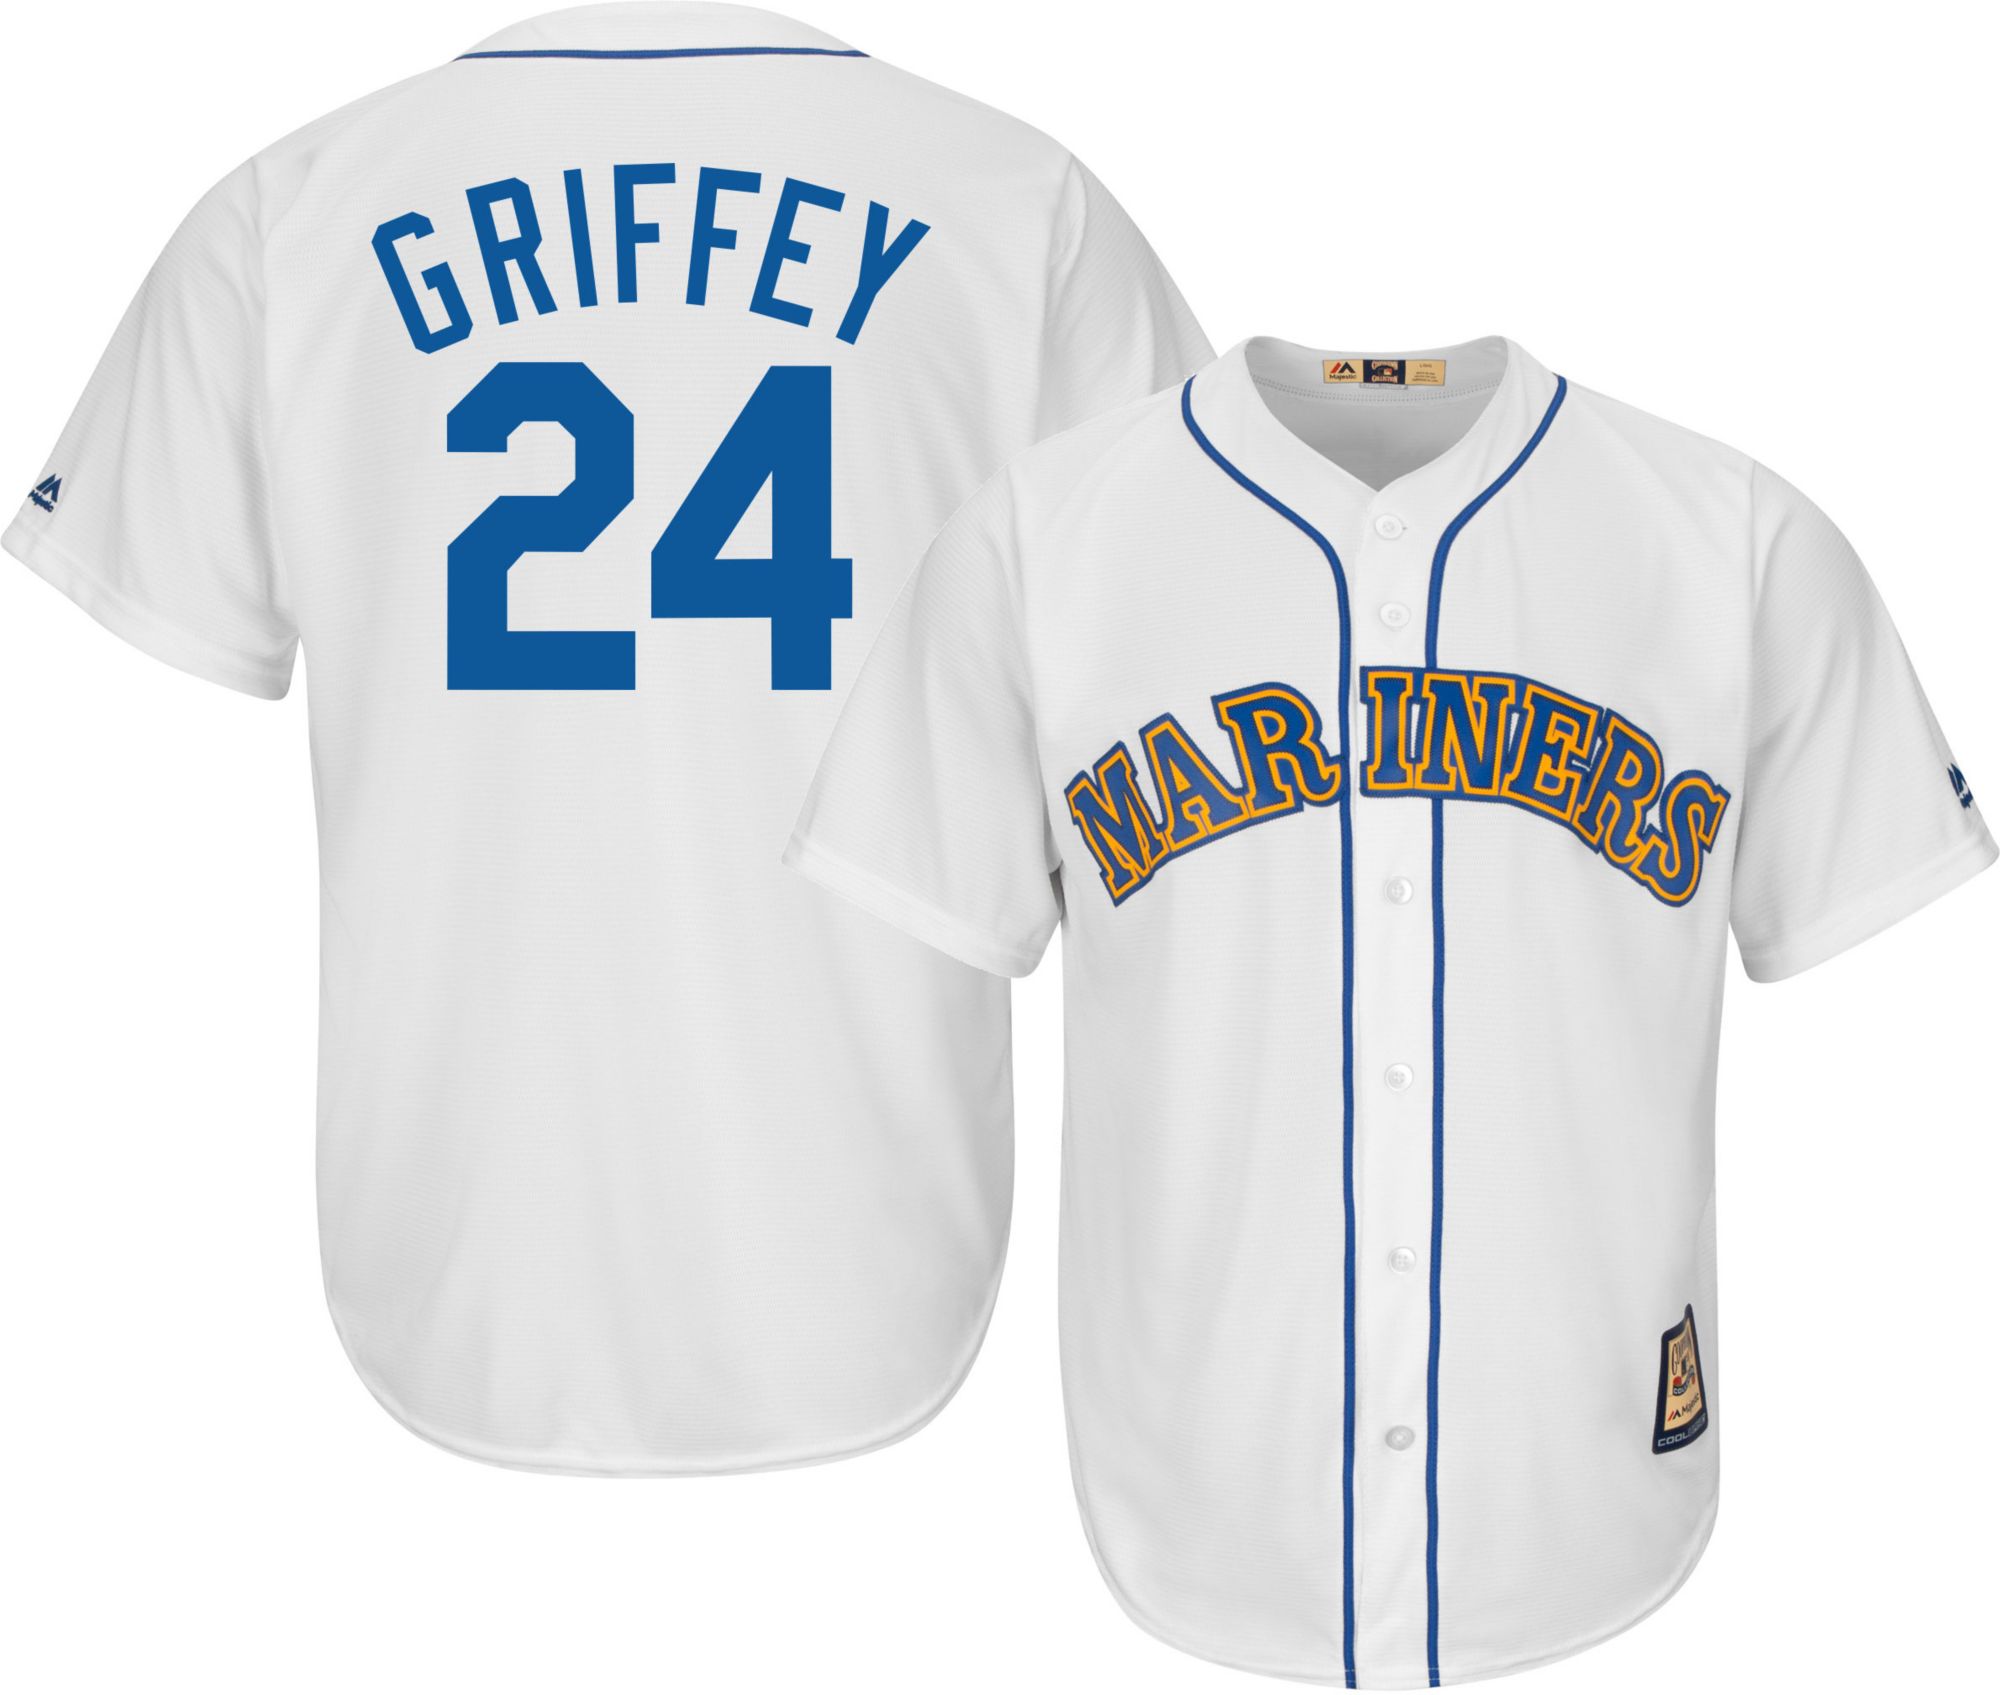 griffey throwback jersey